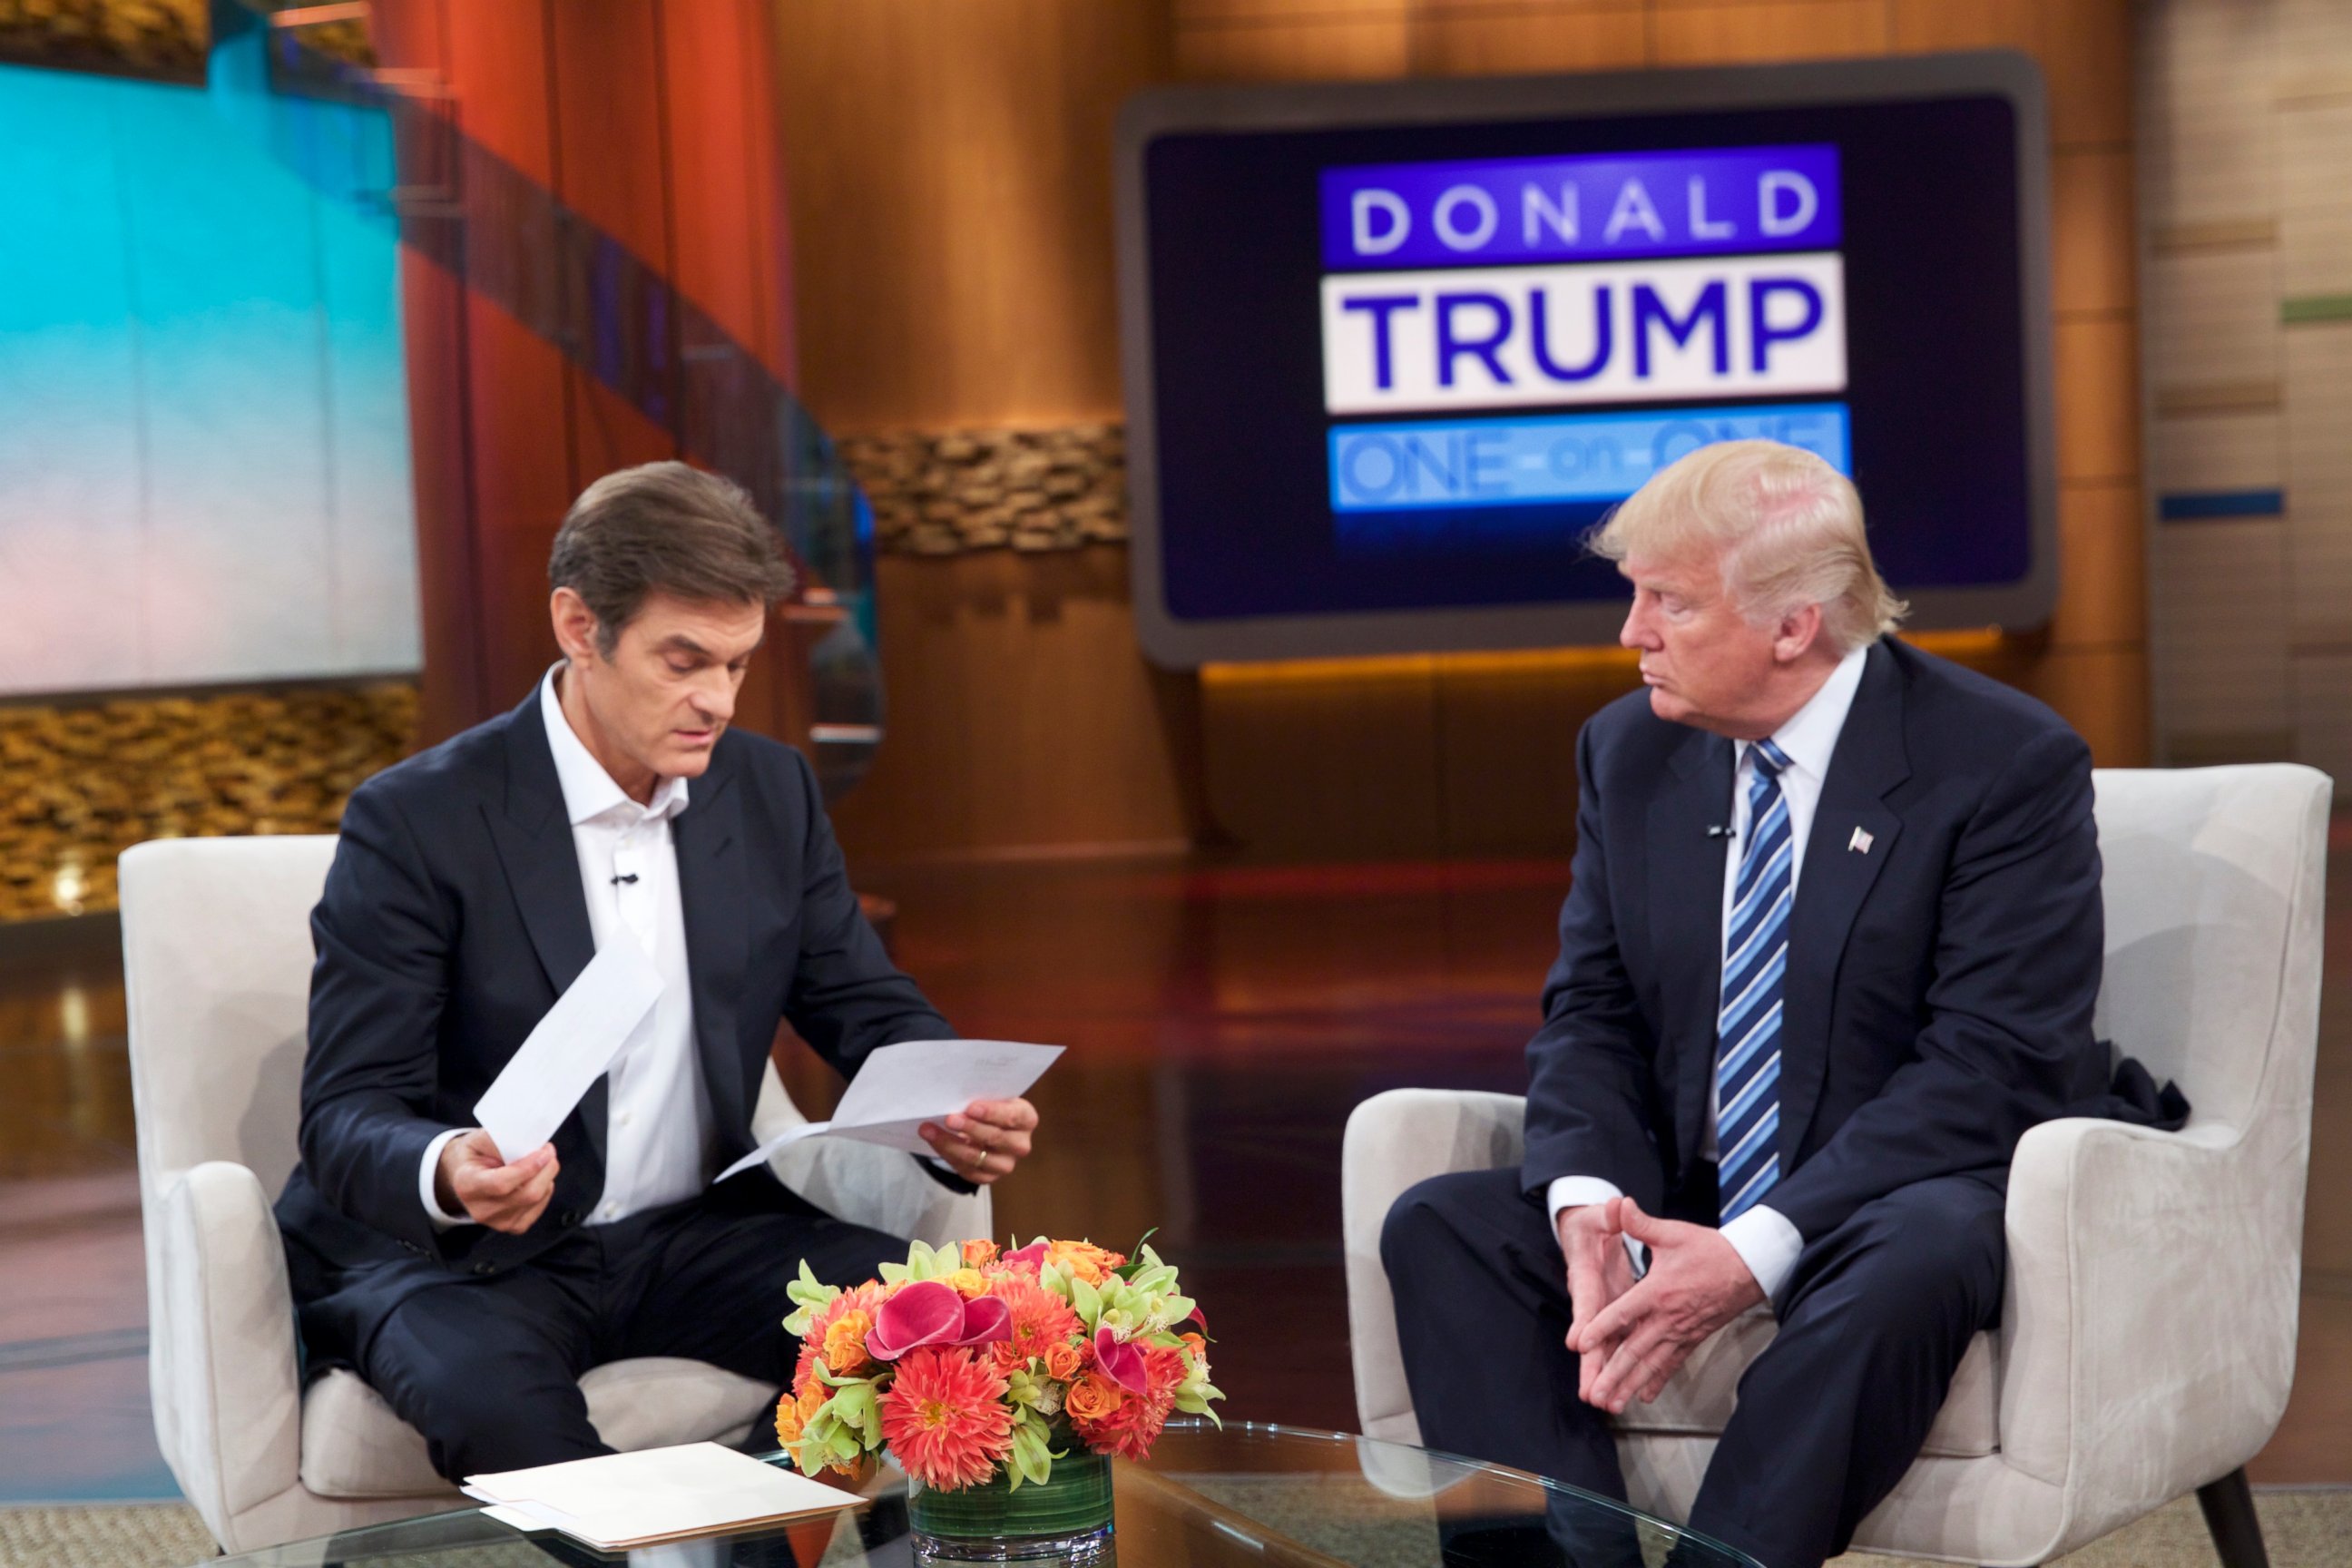 PHOTO: Donald Trump releases medical records for the first time to Dr. Oz on The Dr. Oz Show detailing the results of his most recent physical examination, Sept. 14, 2016.